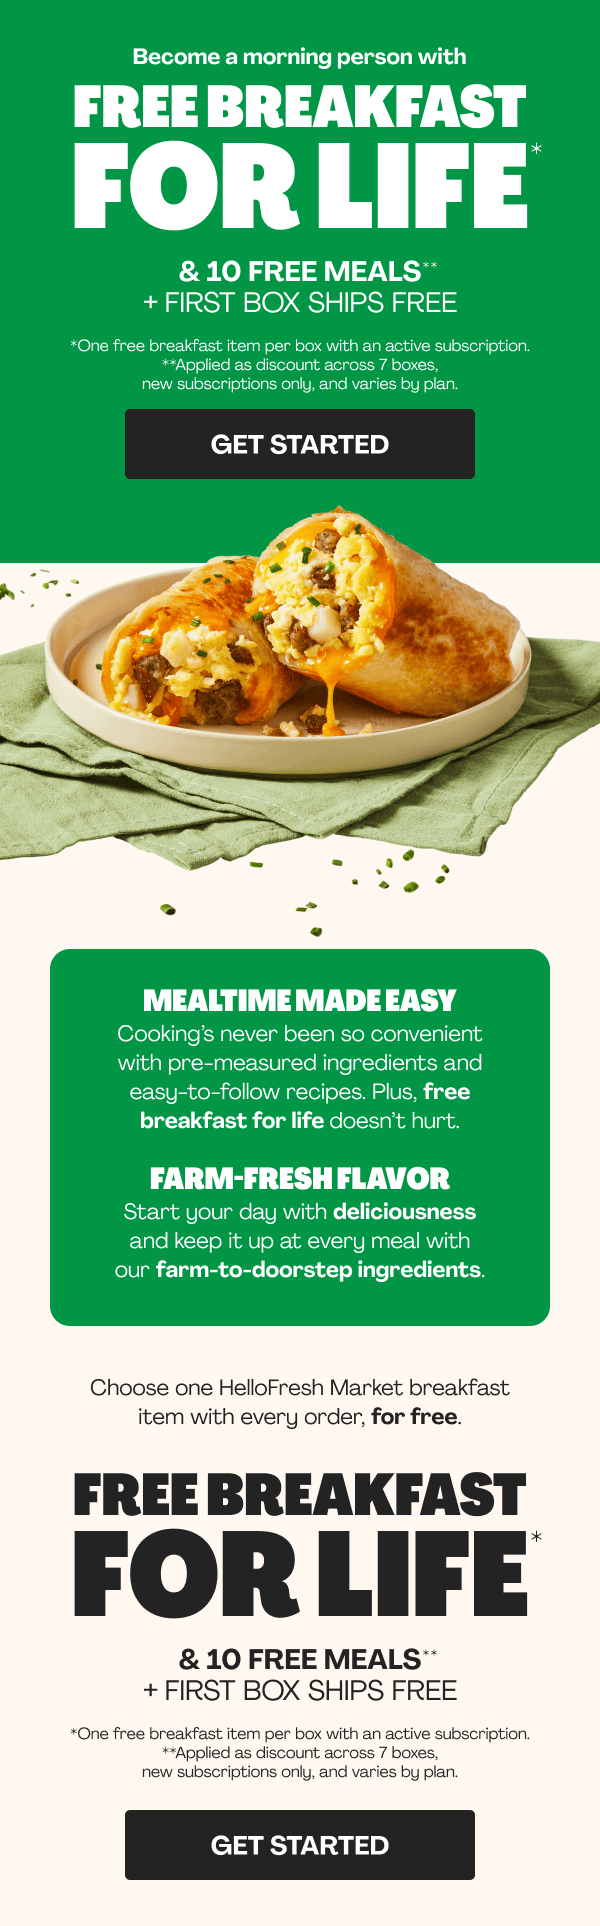 Get 10 FREE MEALS + FIRST BOX SHIPS FREE + FREE BREAKFAST FOR LIFE